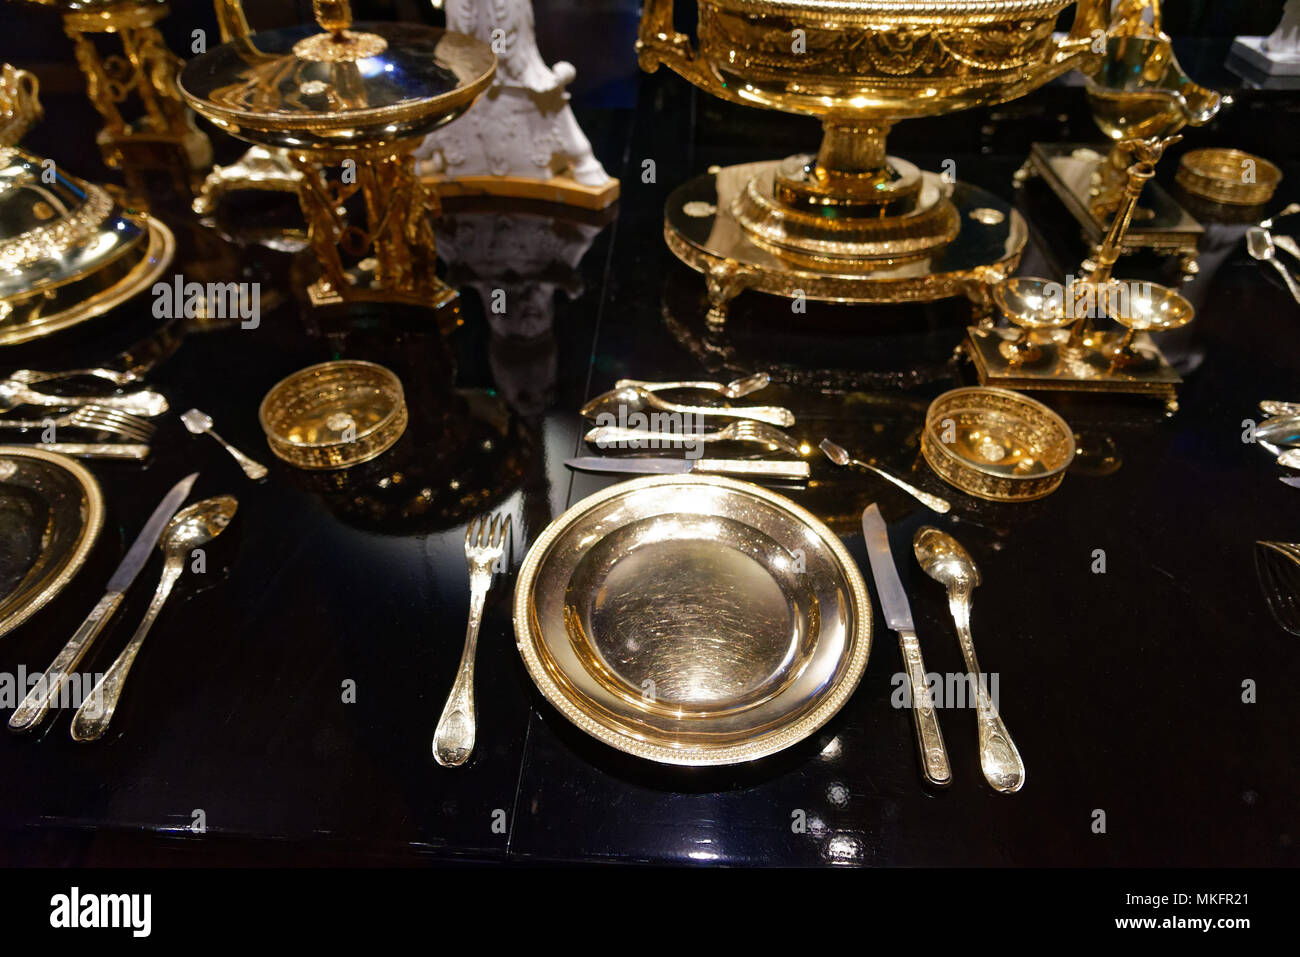 Dinner service from Napoleon's wedding feast in an exhibition in Montreal's Fine Arts Museum Stock Photo